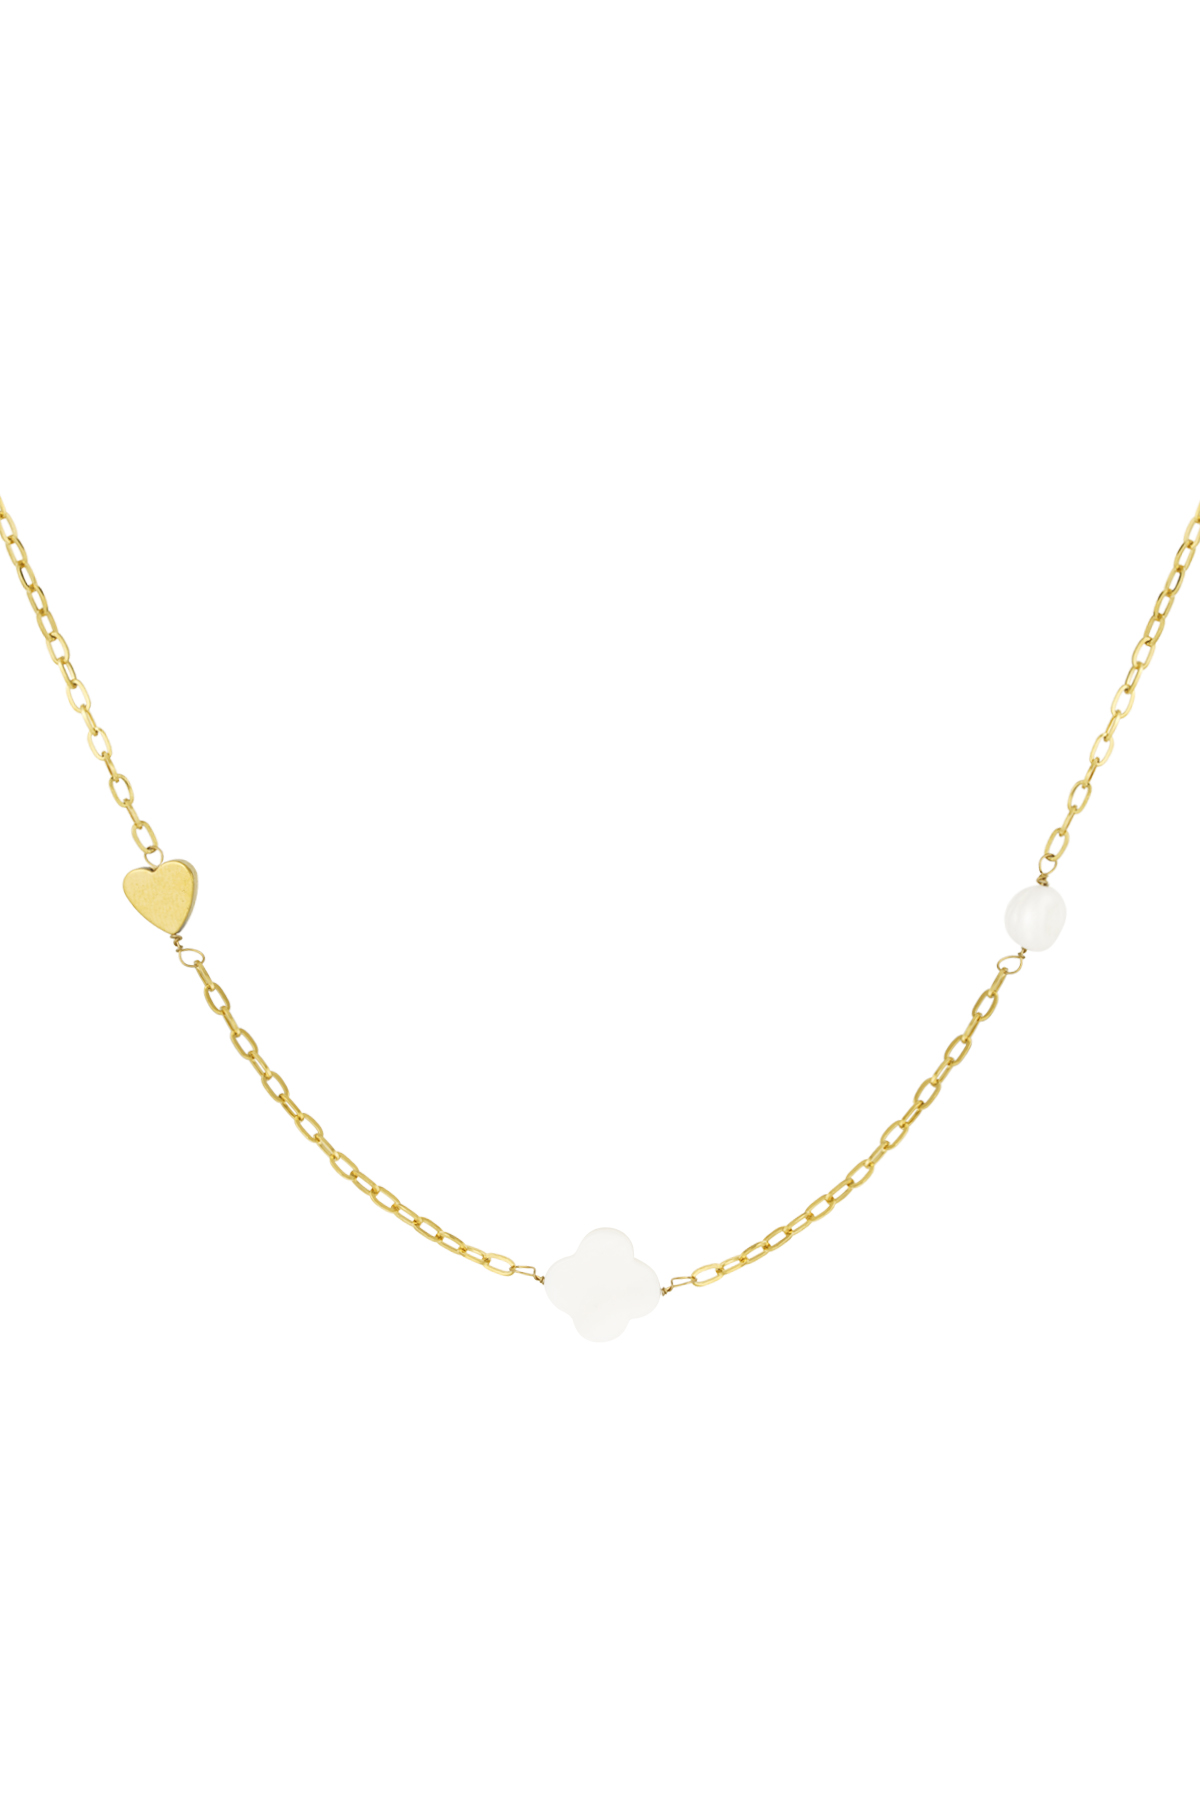 Necklace heart clover shell - gold h5 